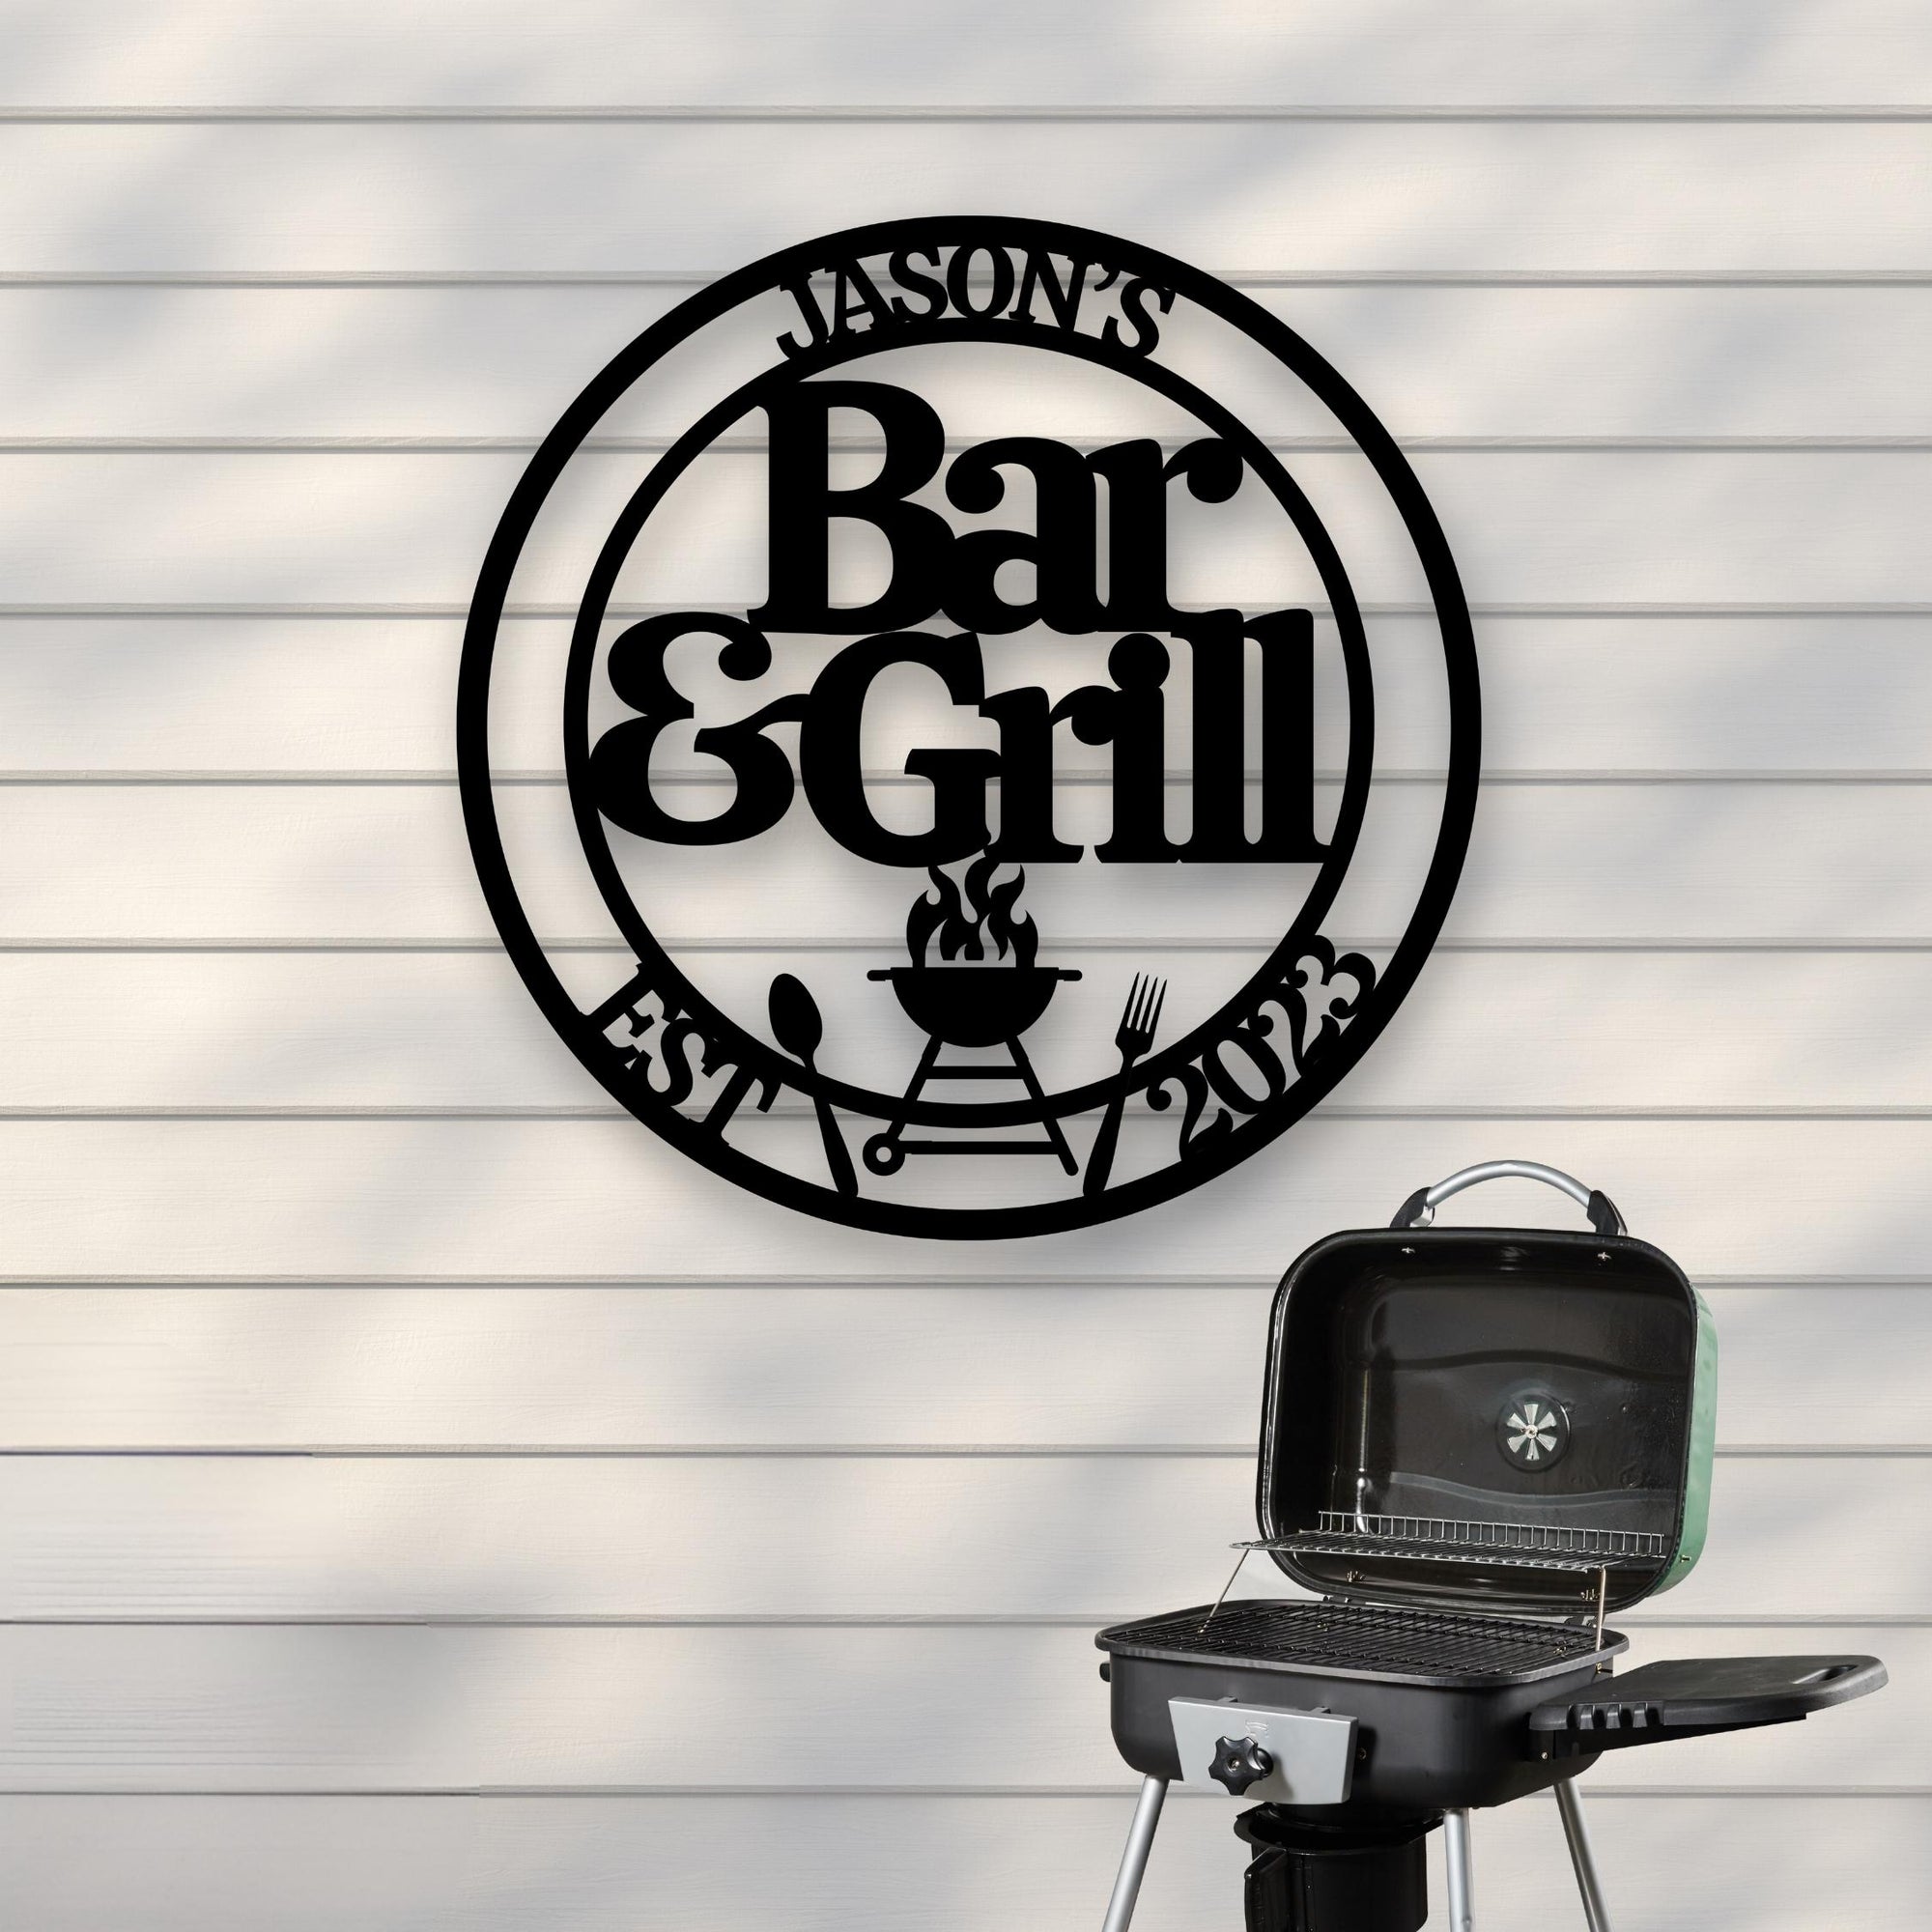 Custom Barbecue Hoop, Personalised Family BBQ Wall Art, Chill &amp; Grill Bar Display Hanging Sign, Kitchen Backyard, Housewarming Decor Signage